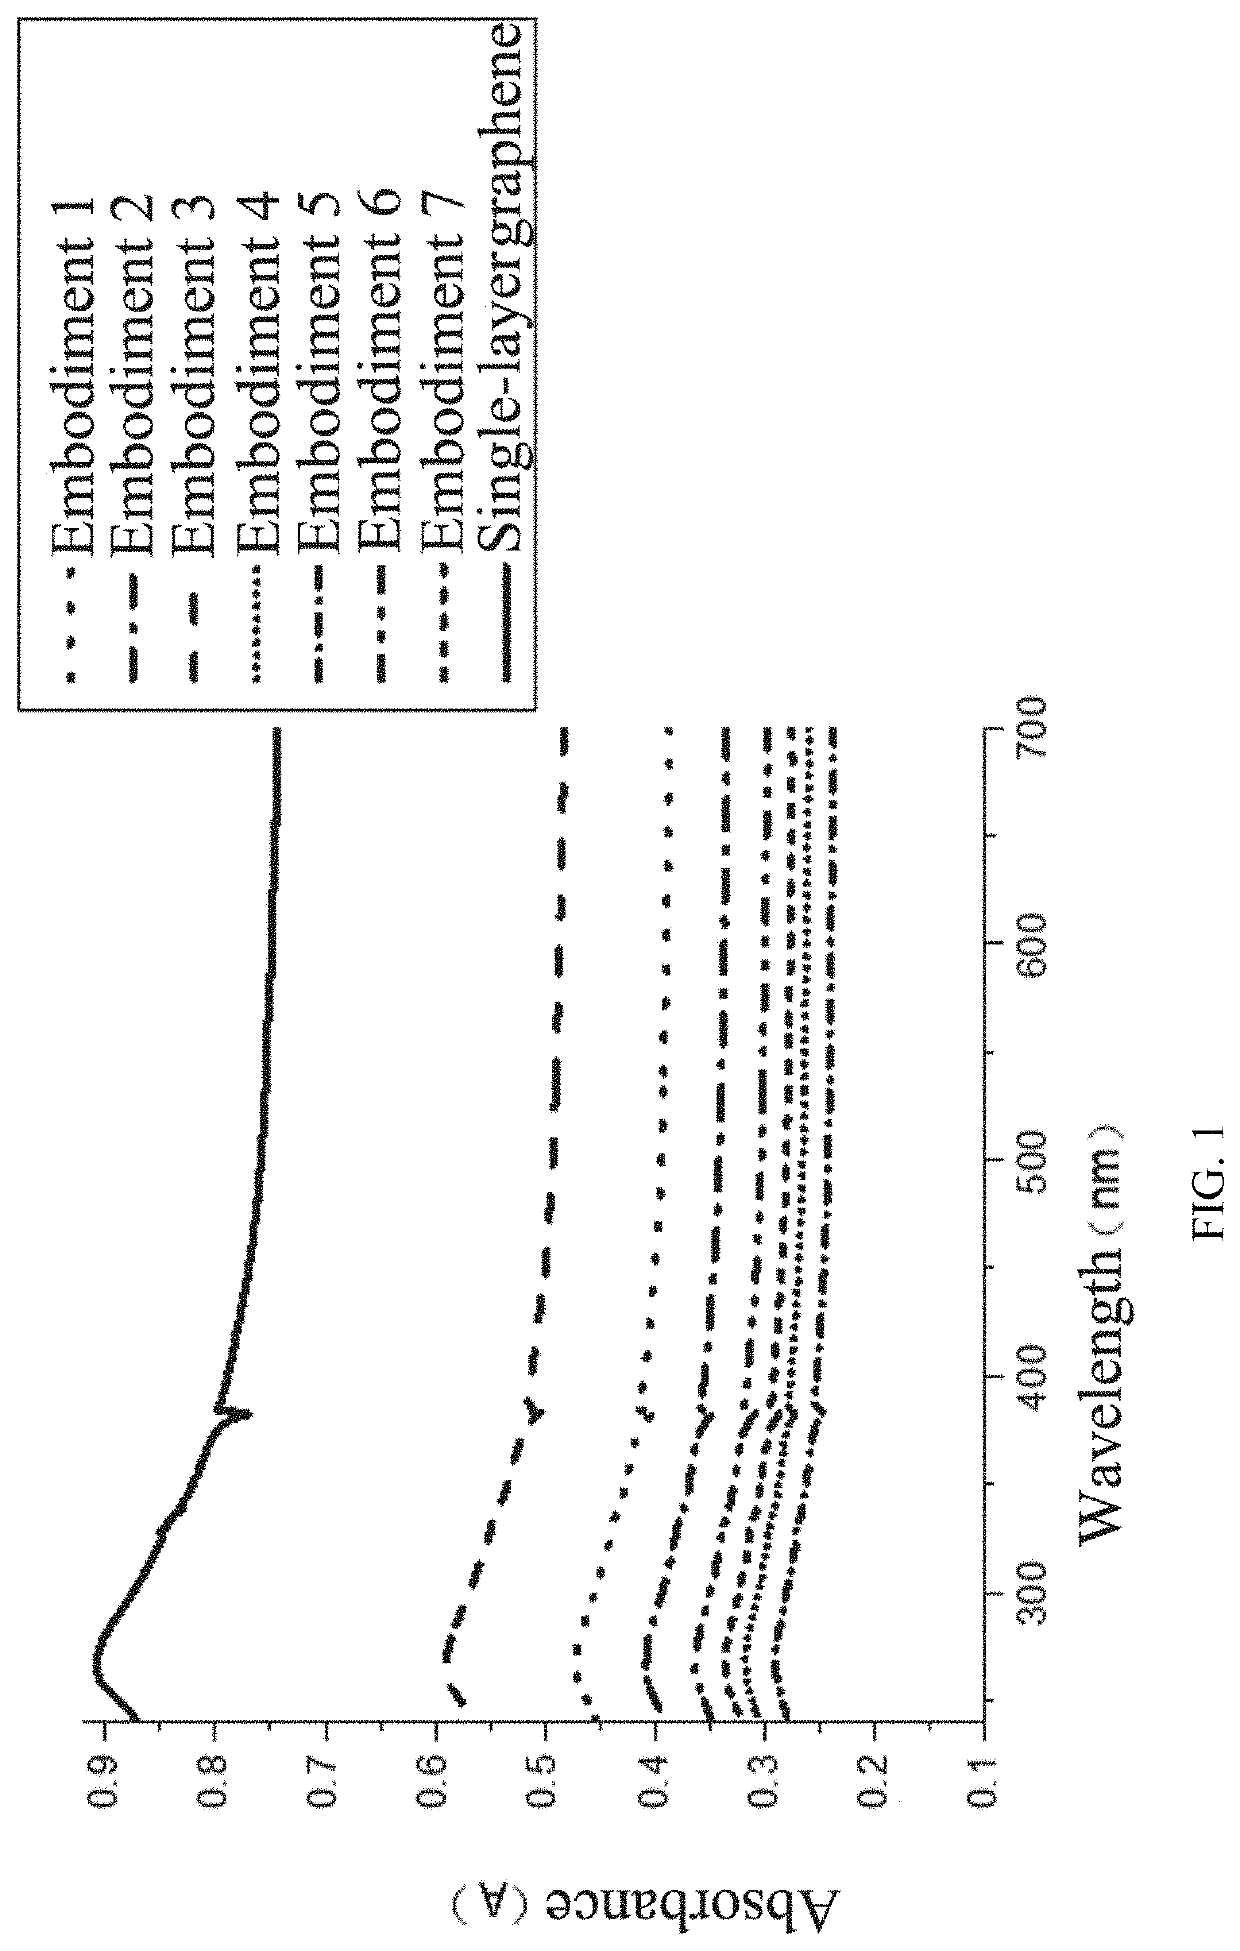 Intercalation agent for rapid graphite exfoliation in mass production of high-quality graphene